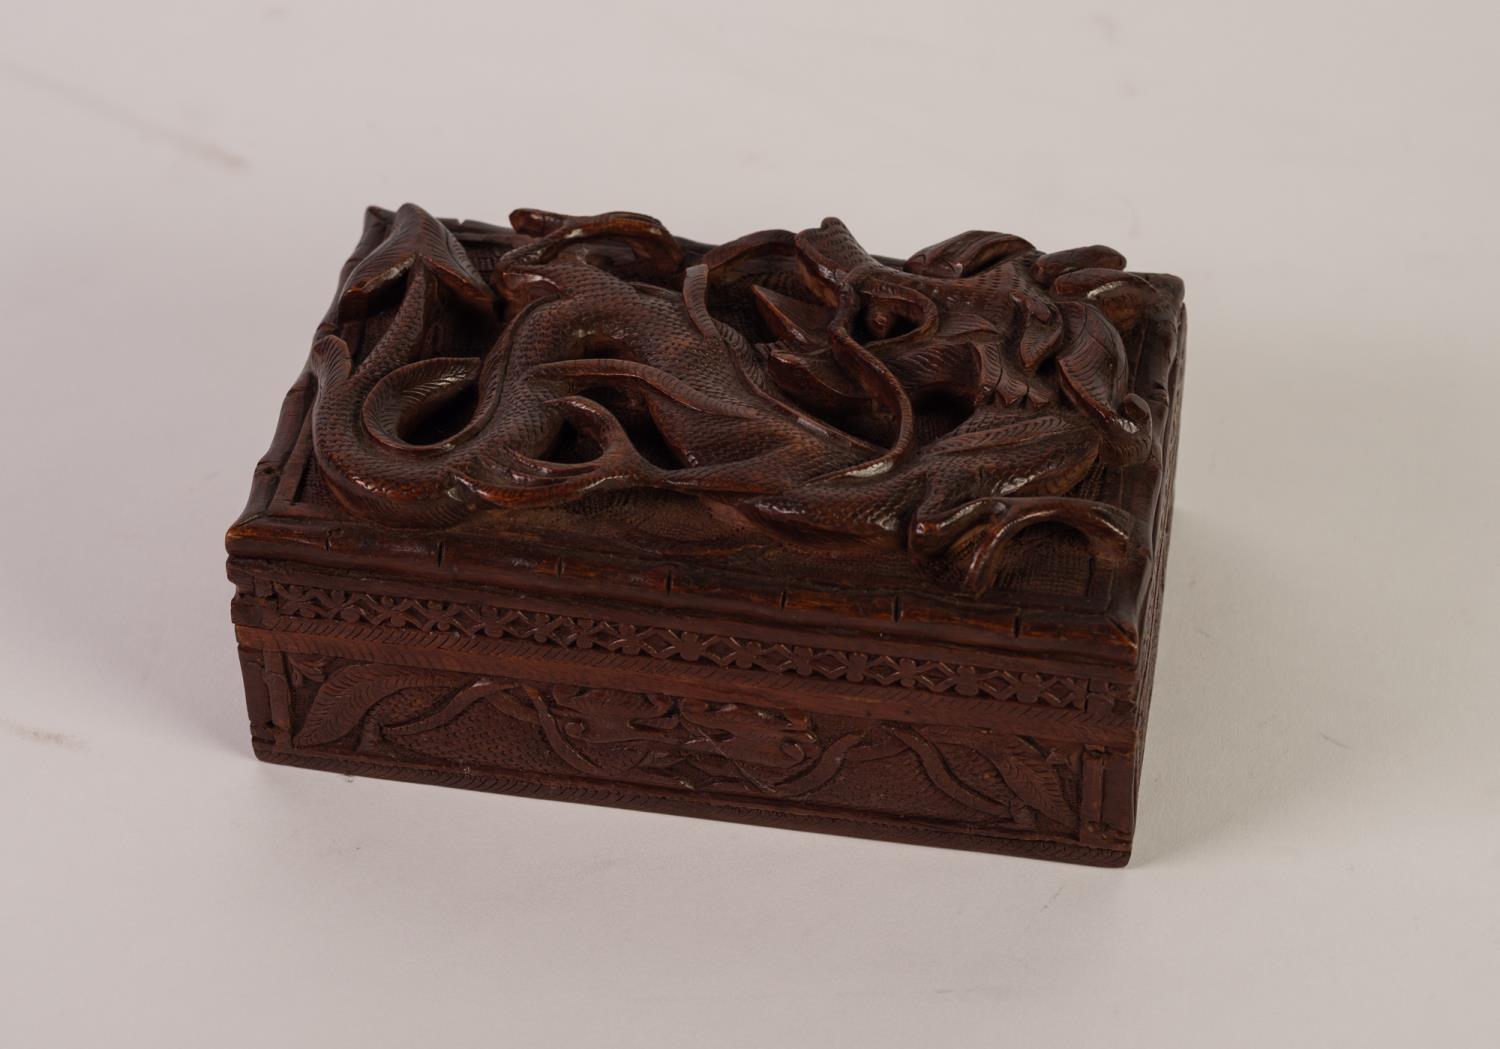 EARLY 20th CENTURY CARVED WOODEN BOX, the hinged lid in bold undercut relief with a mythical dragon,